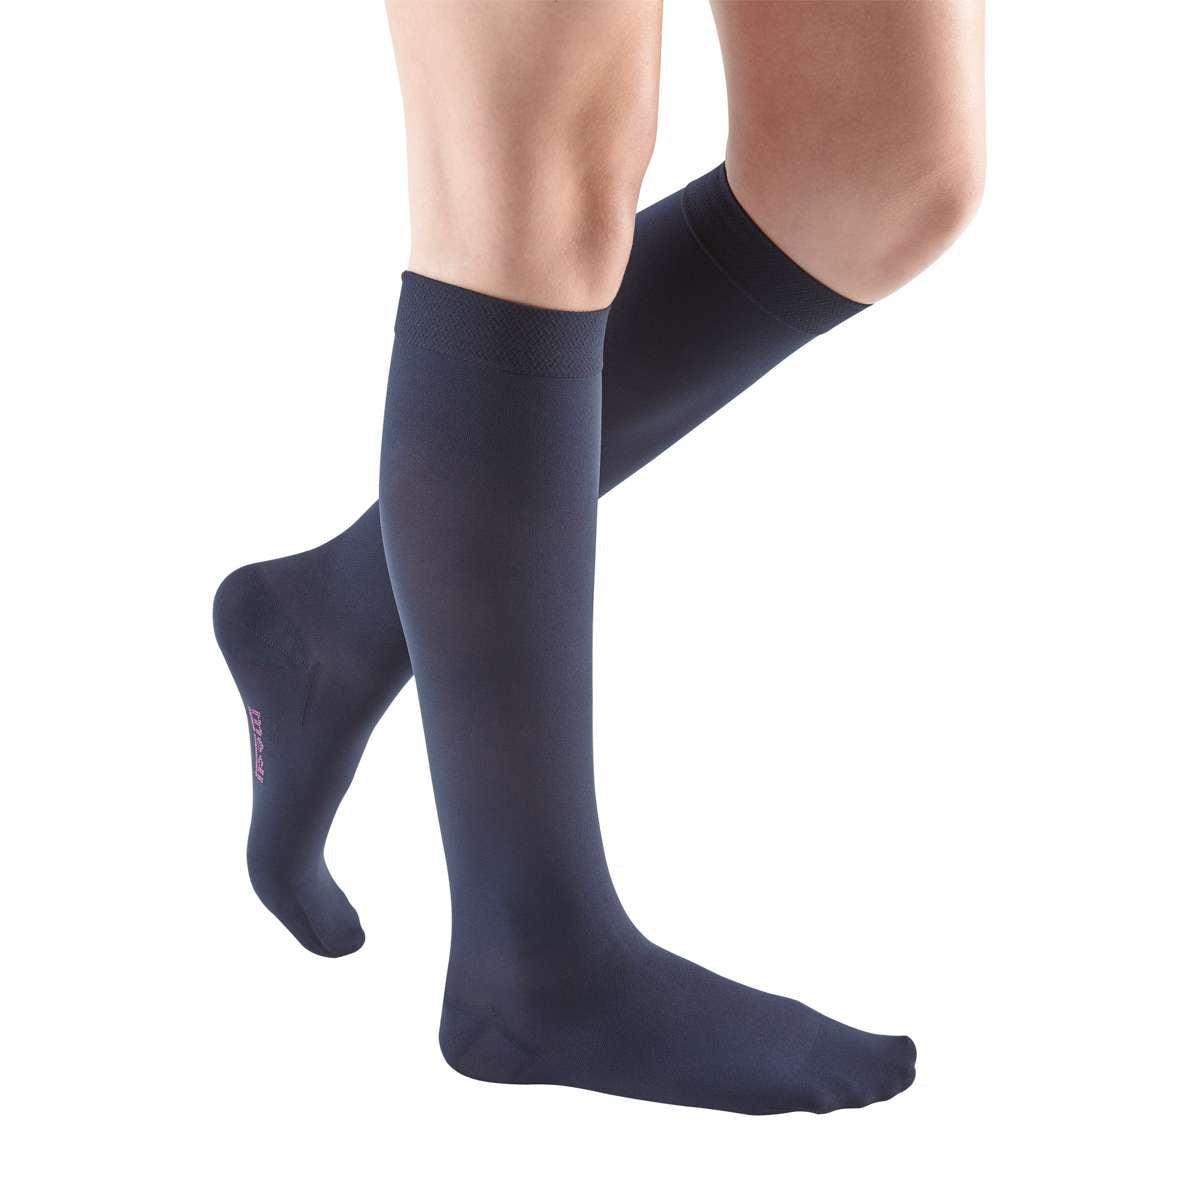 mediven comfort 20-30 mmHg Calf High Open Toe Compression Stockings –  Wasatch Medical Supply